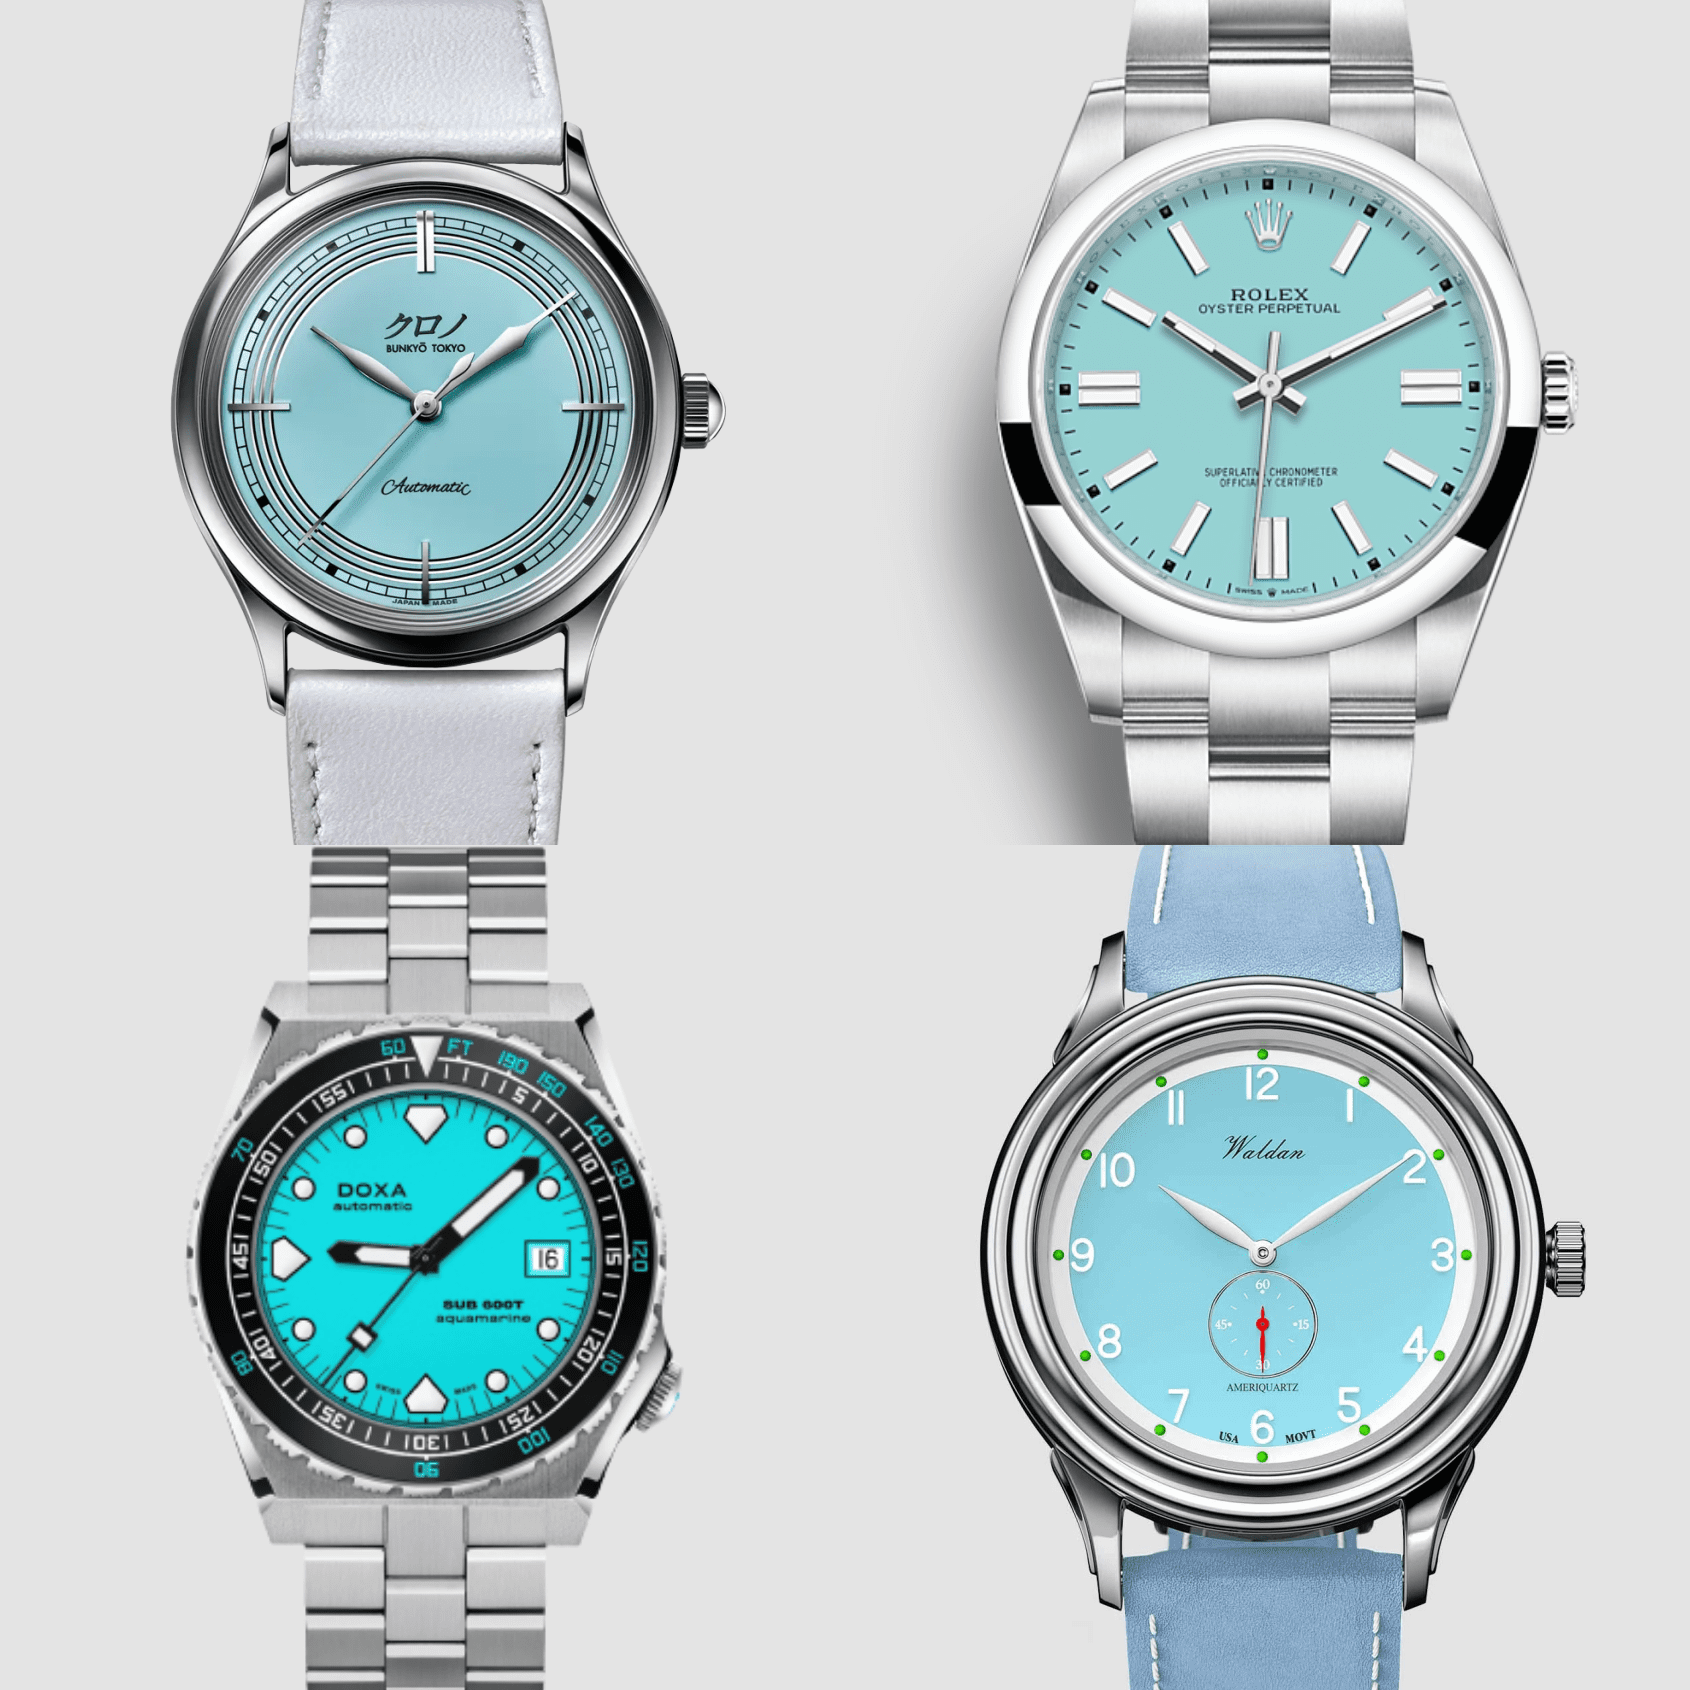 Missed out on the latest Nautilus? Here are ten of the best Tiffany blue dial alternatives